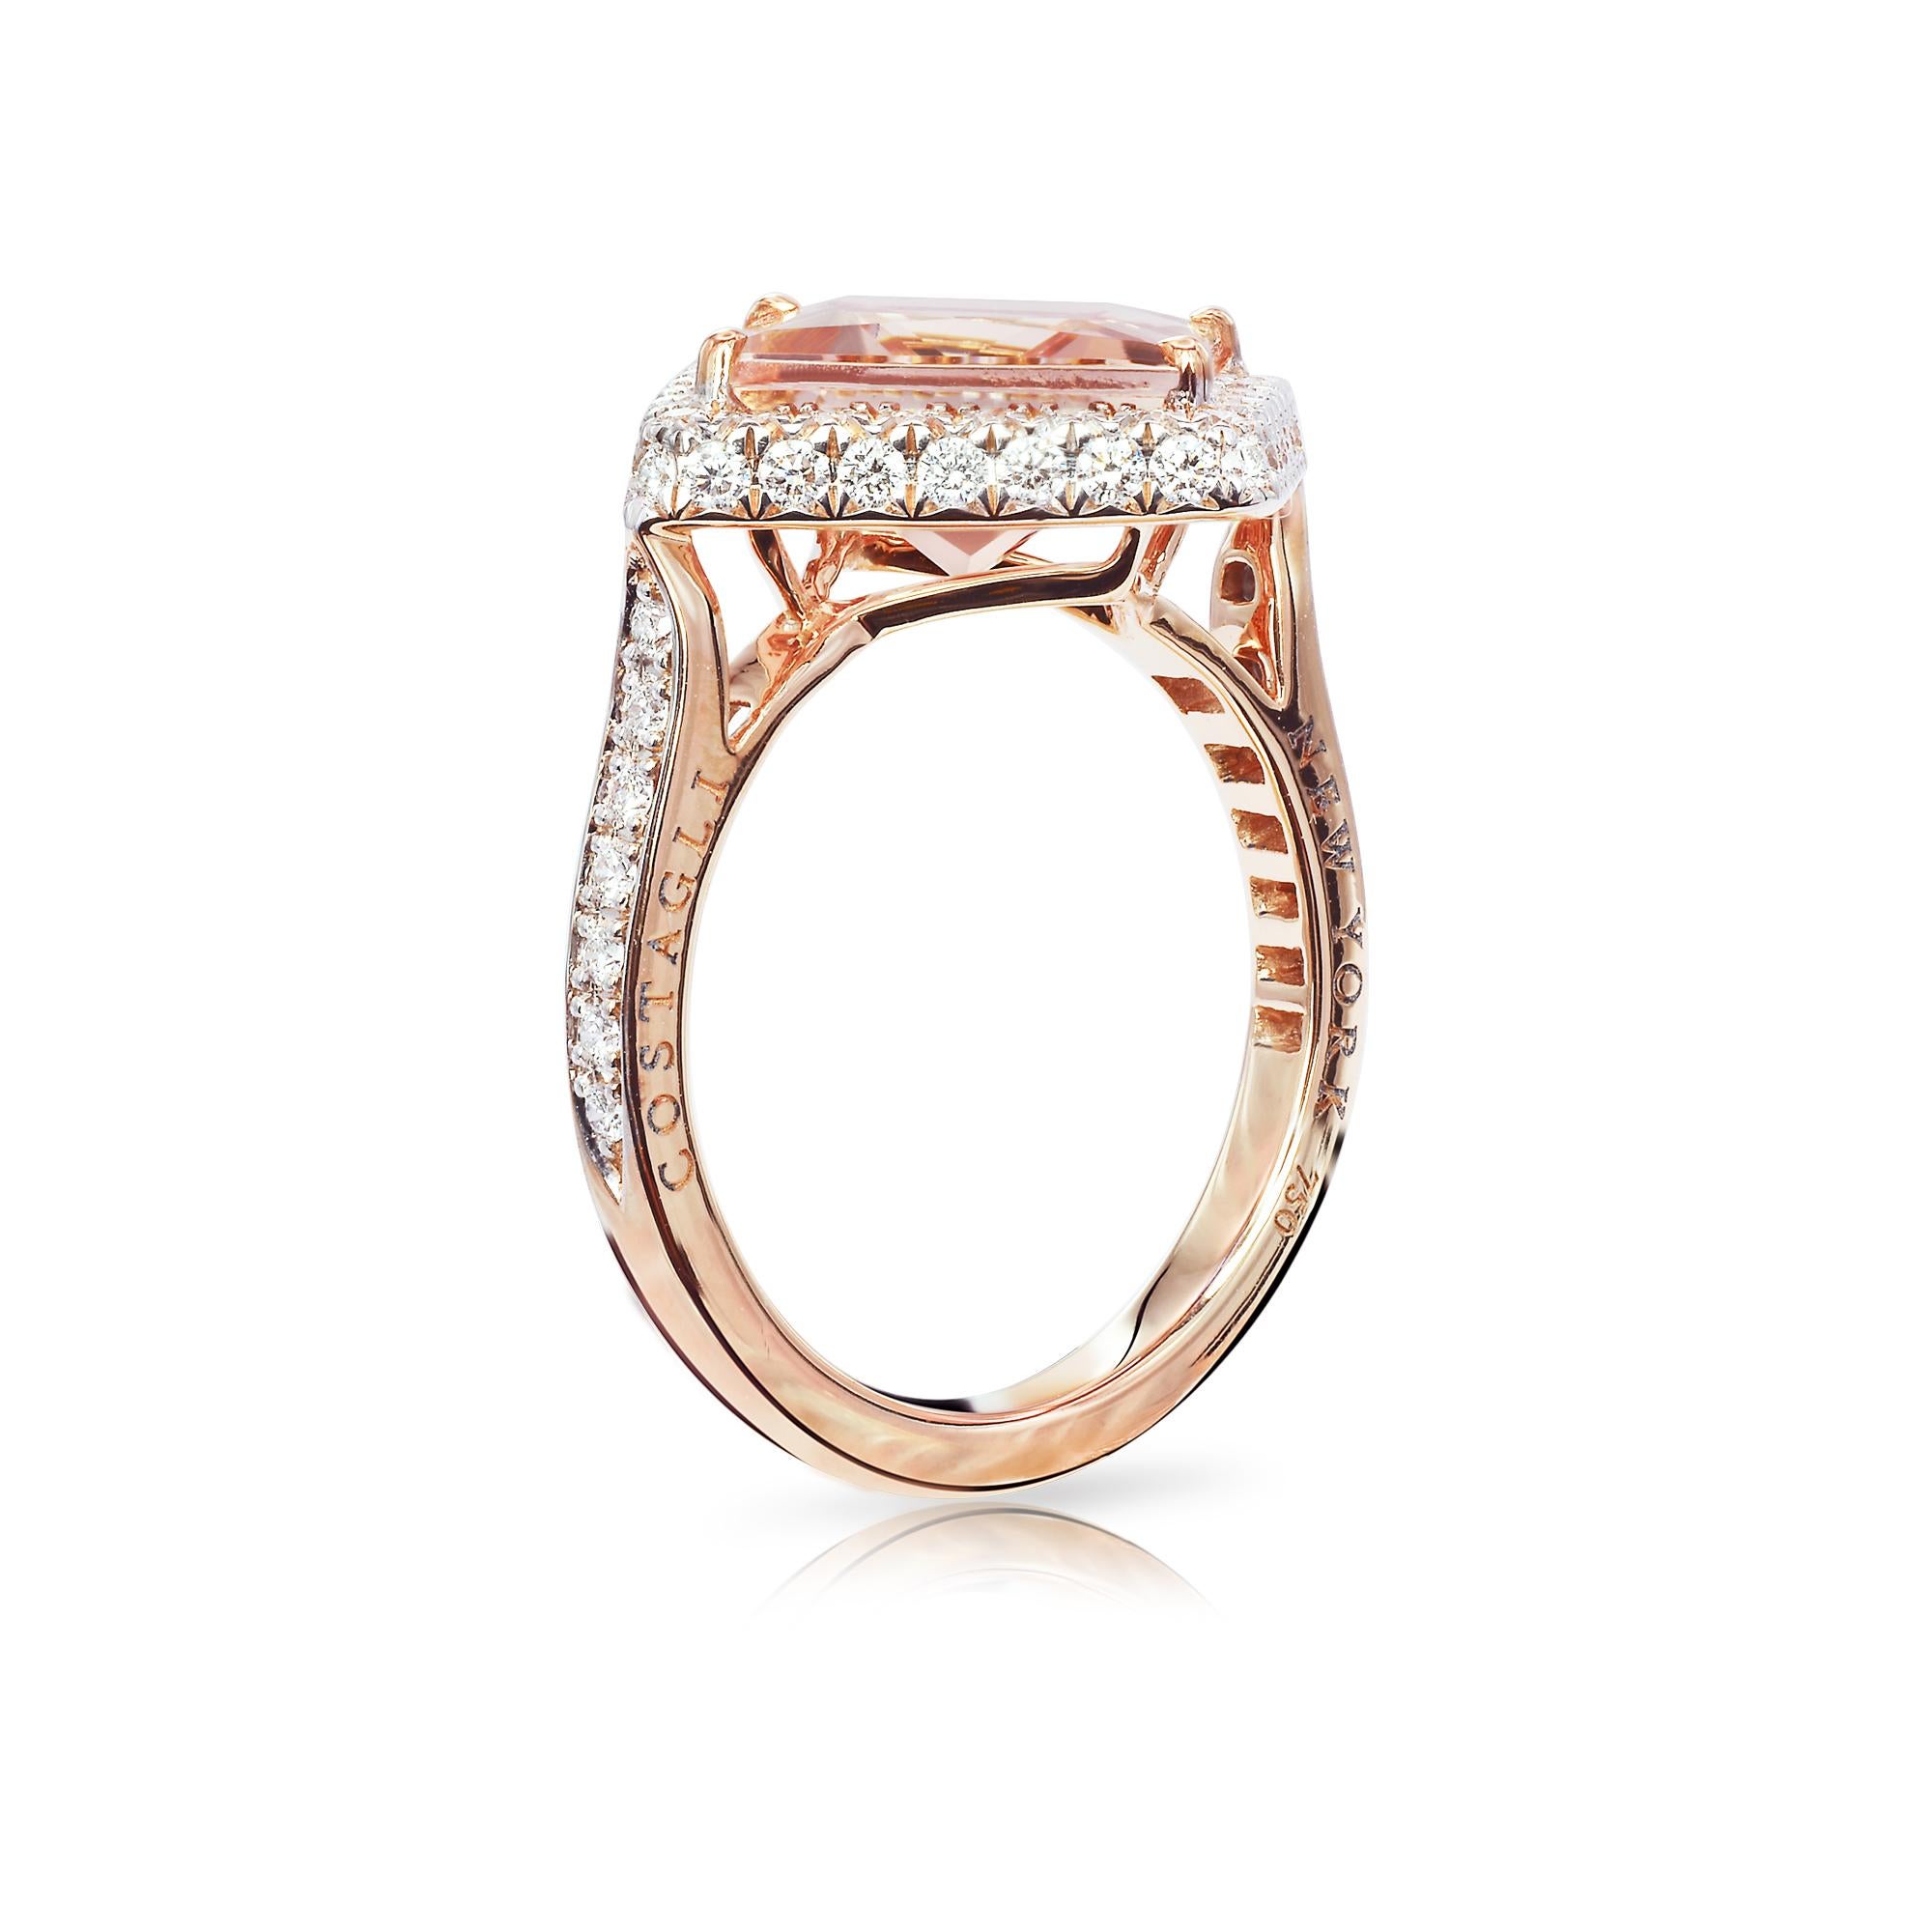 One of a kind 18 karat rose gold ring set with a radiant-cut pastel morganite and pave-set round, brilliant diamonds. 

The beauty is in the details - from the combination of hues, the cut of the gemstones, and the color of gold in the mountings,